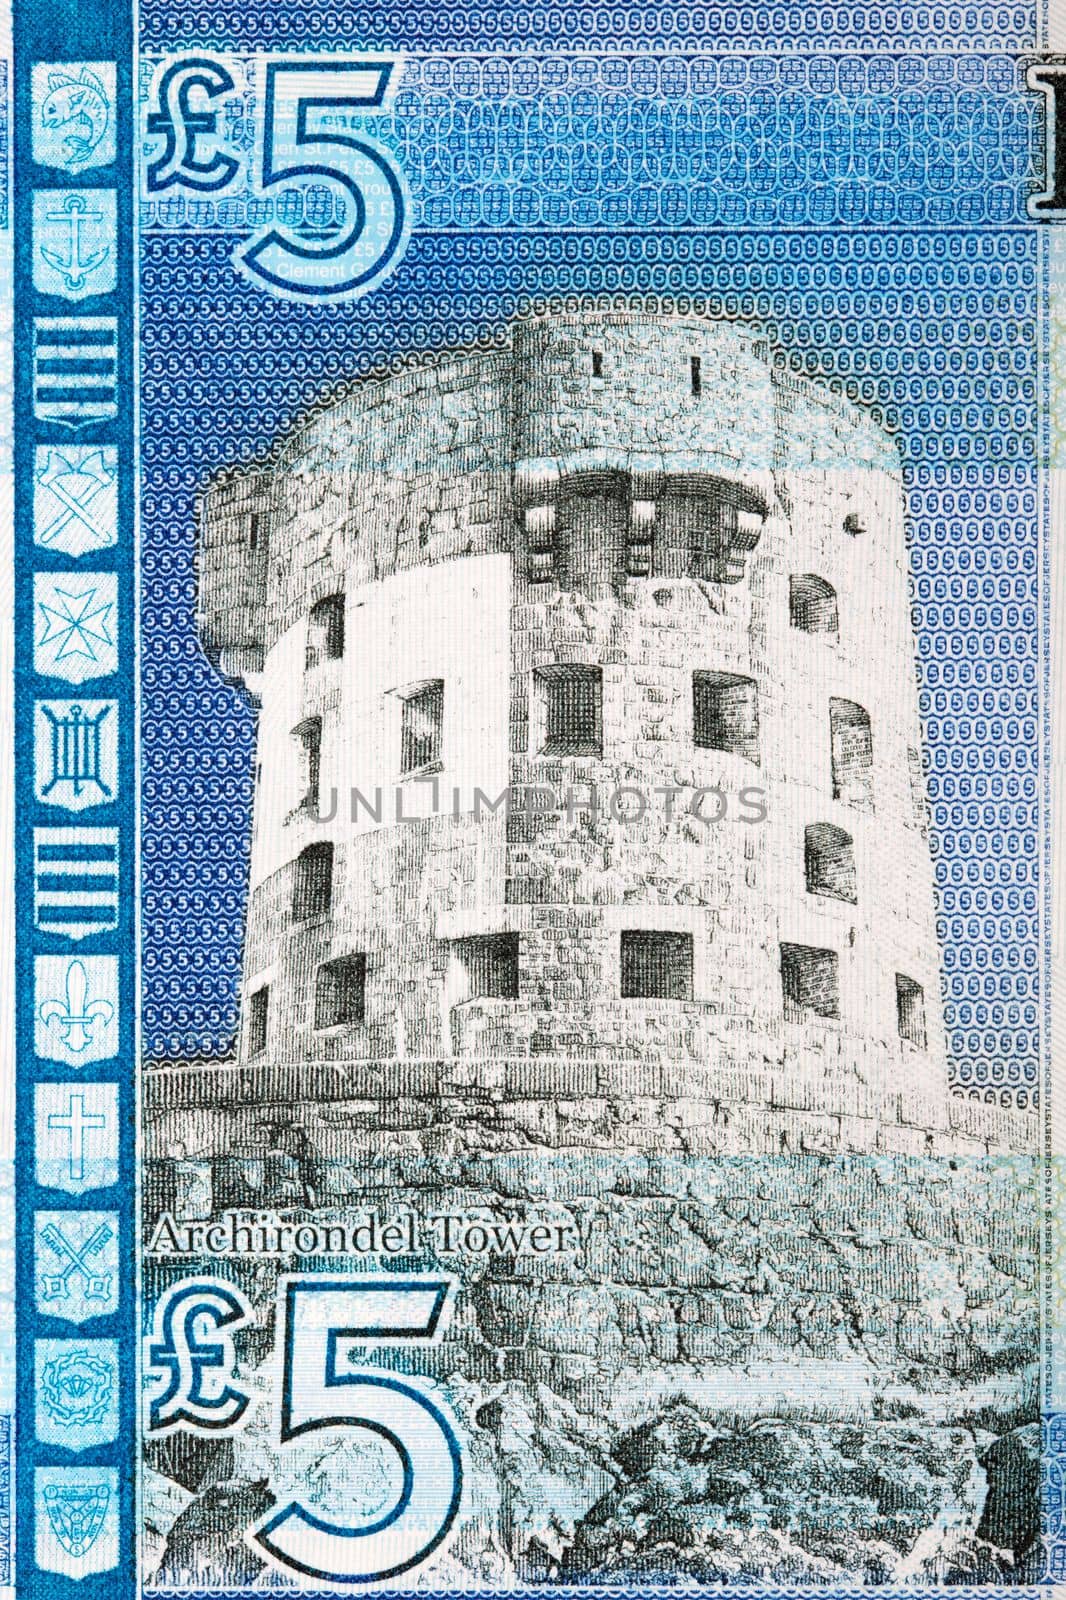 Archirondel Tower from Jersey money - pounds